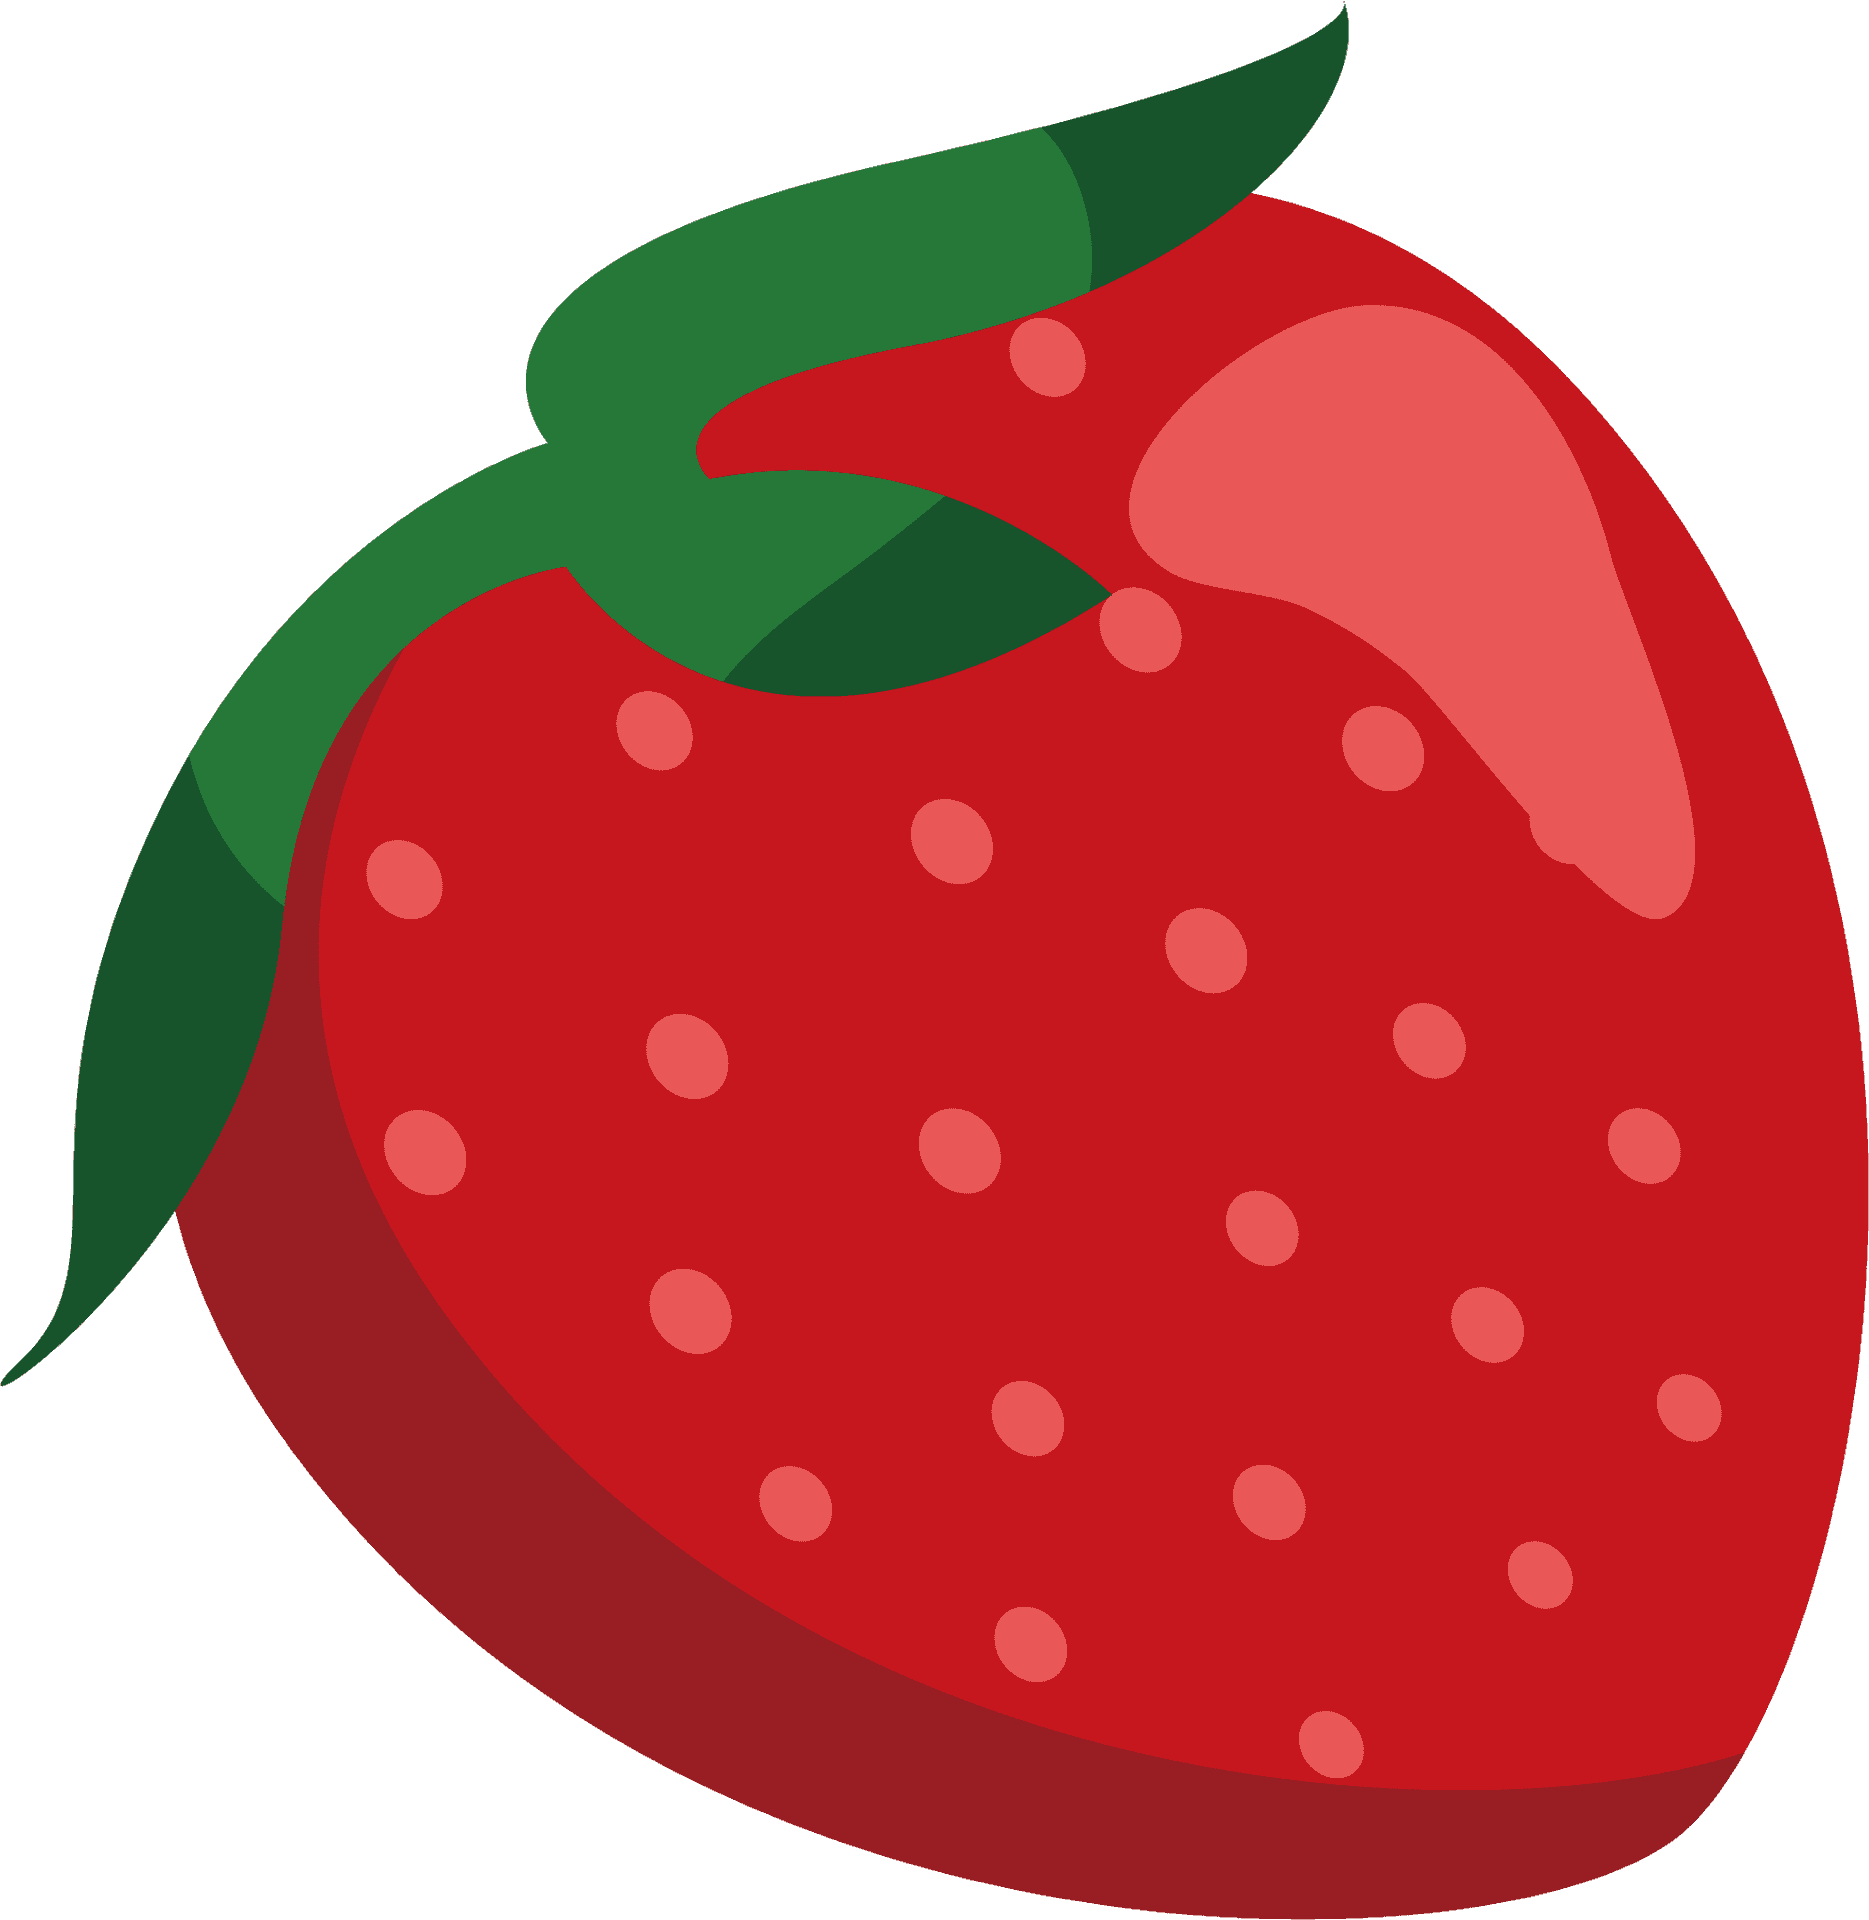 Red Strawberry Cartoon Illustration PNG